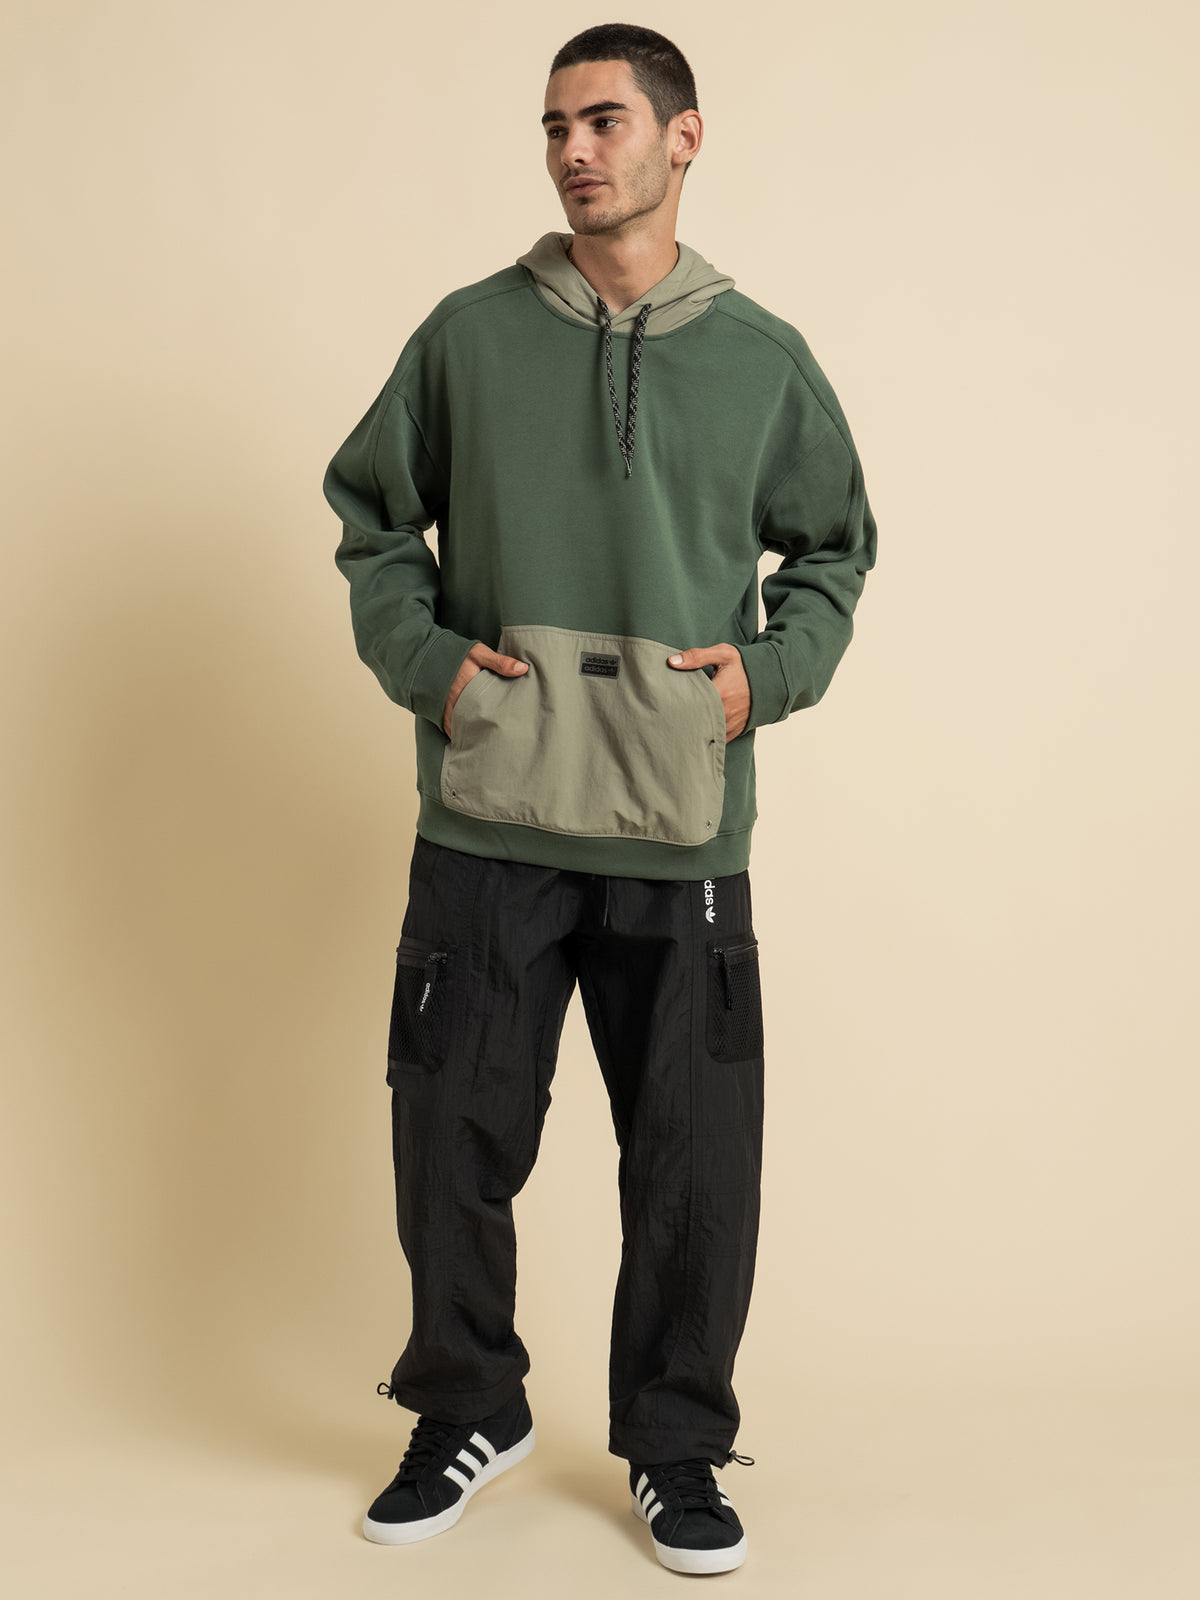 RYV Utililty Hoodie in Green Oxide and Clay